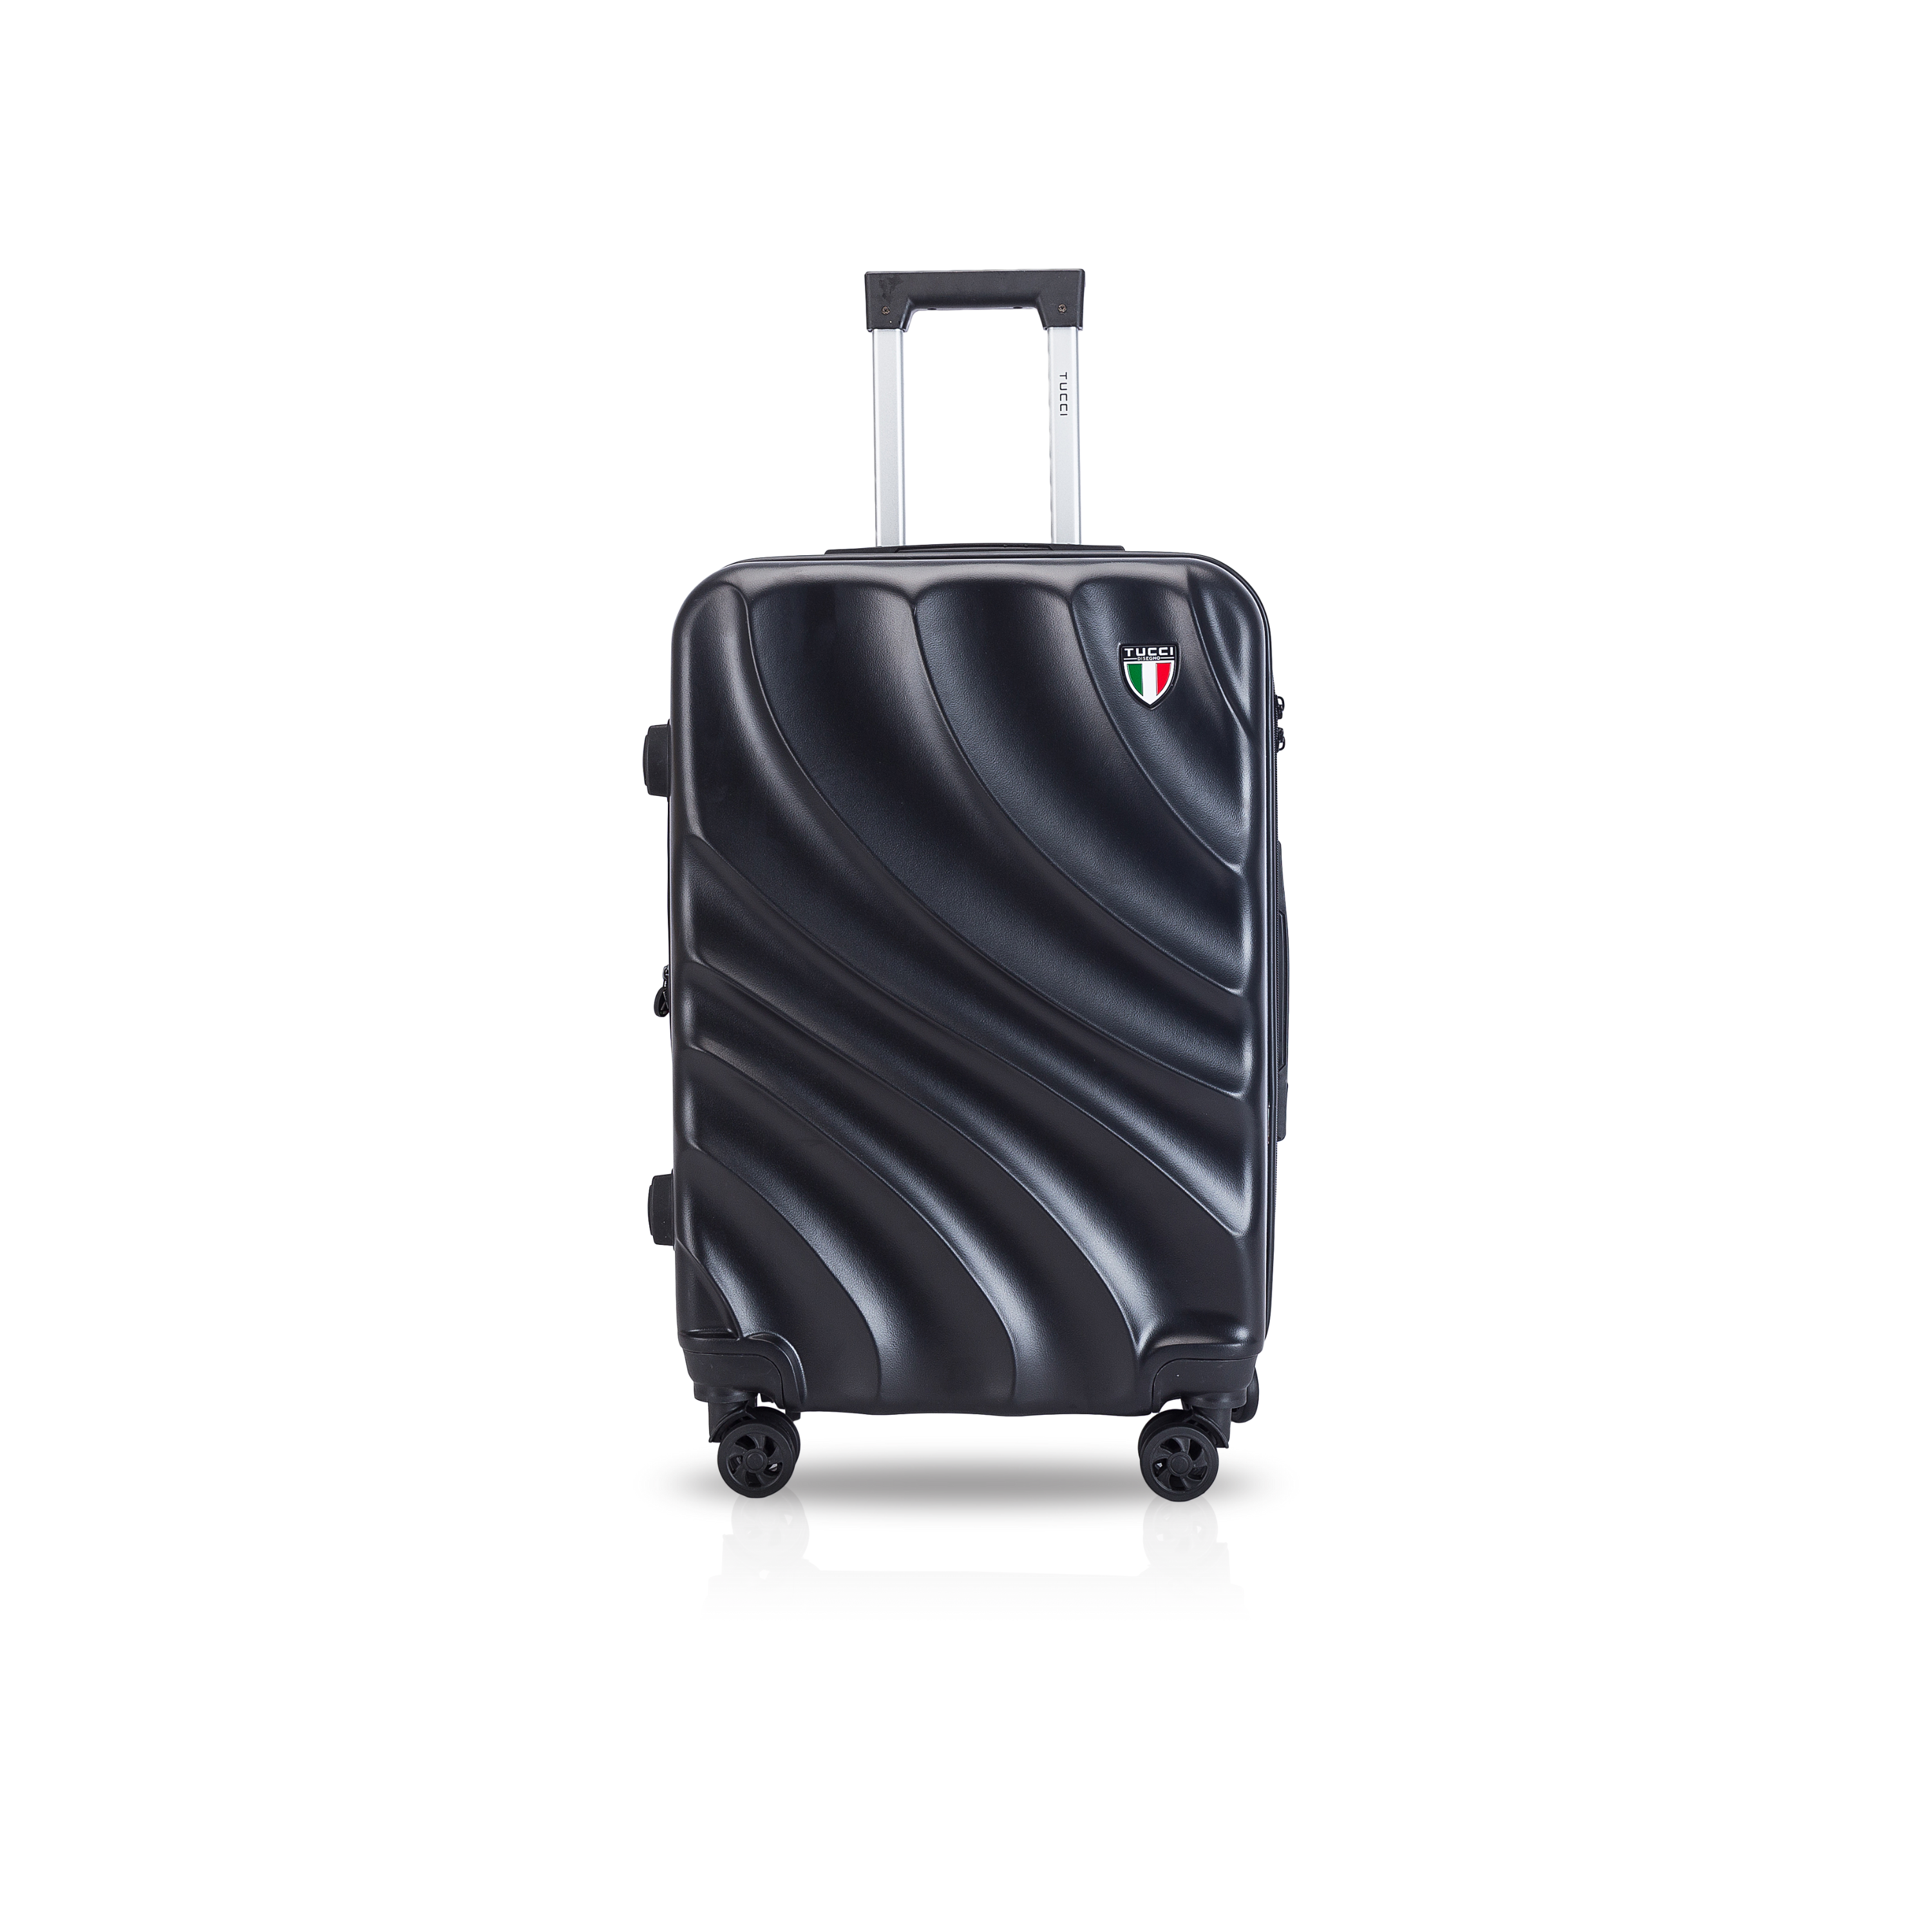 TUCCI CREMOSA ABS 20" Carry On Luggage